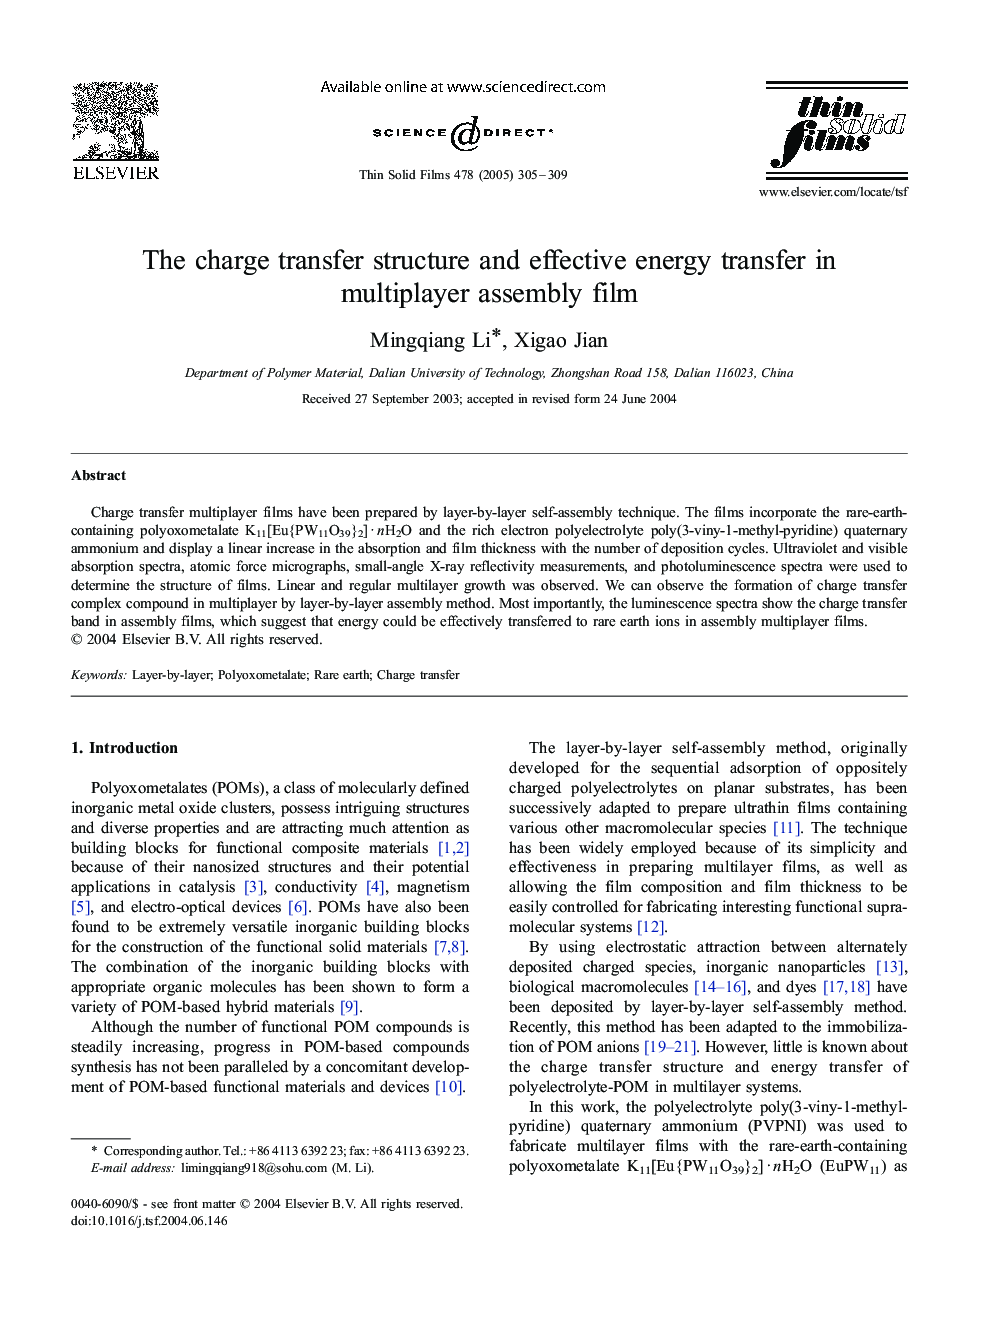 The charge transfer structure and effective energy transfer in multiplayer assembly film